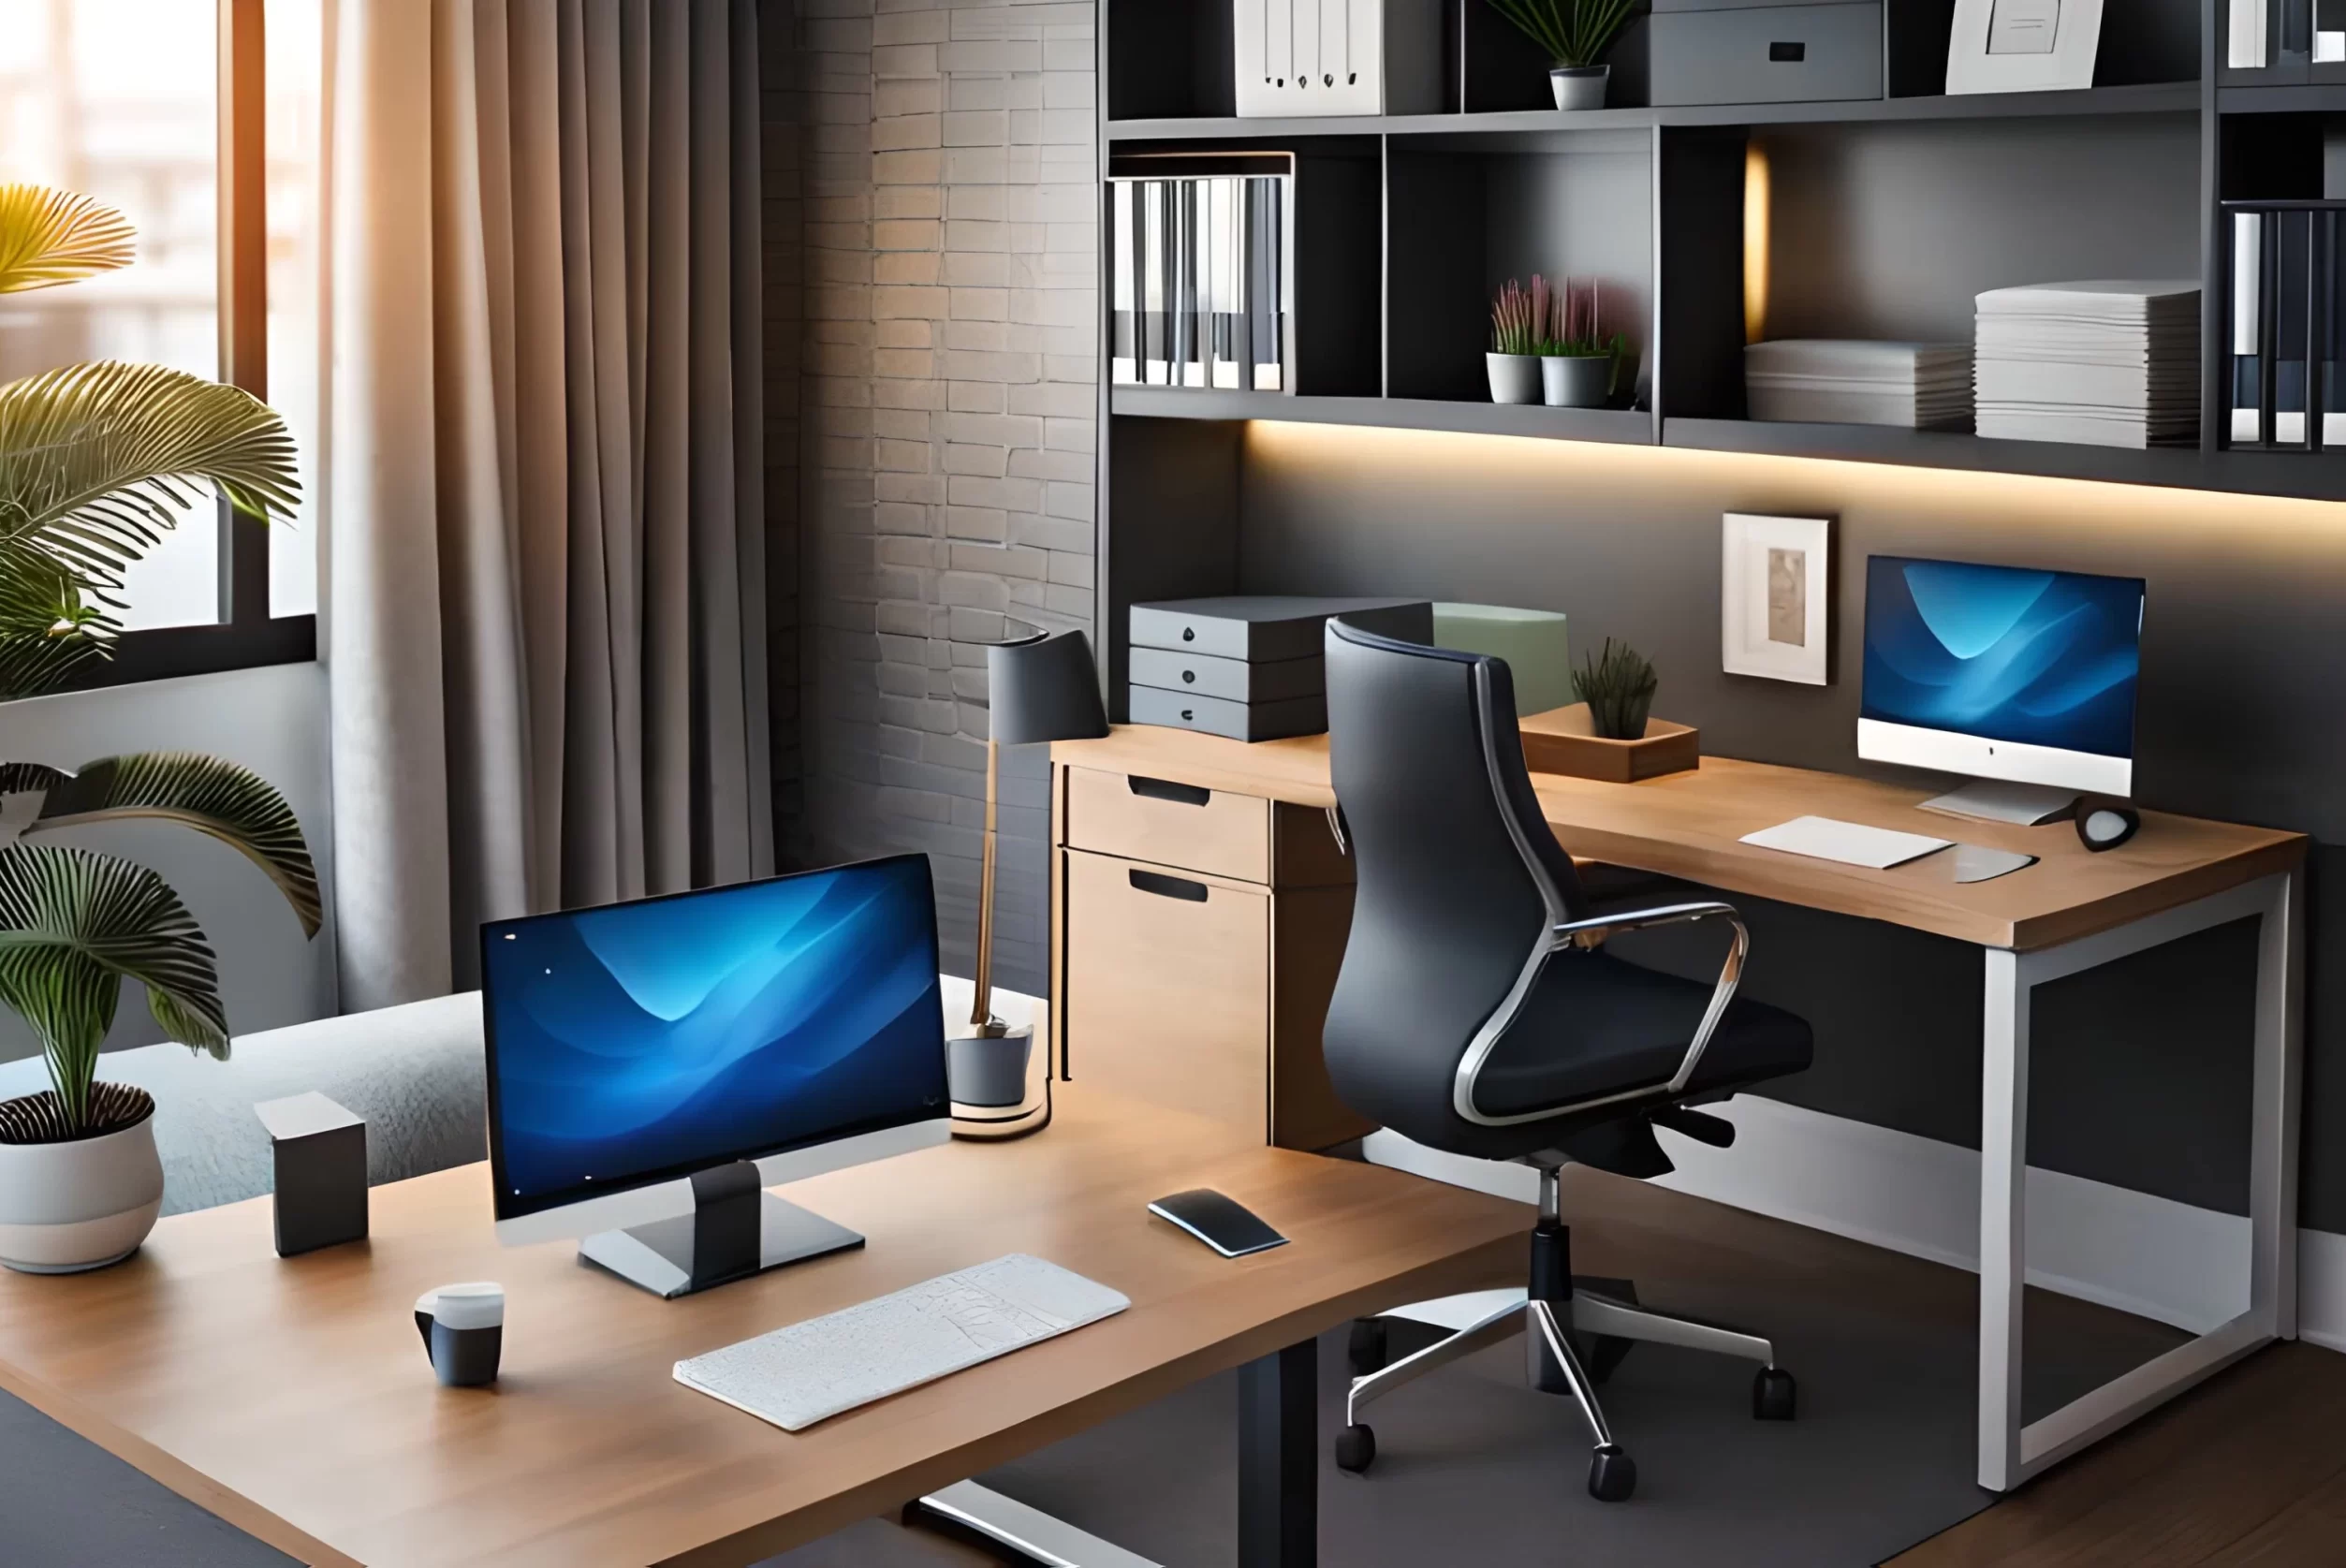 ergonomic office desk and chair design for your office space